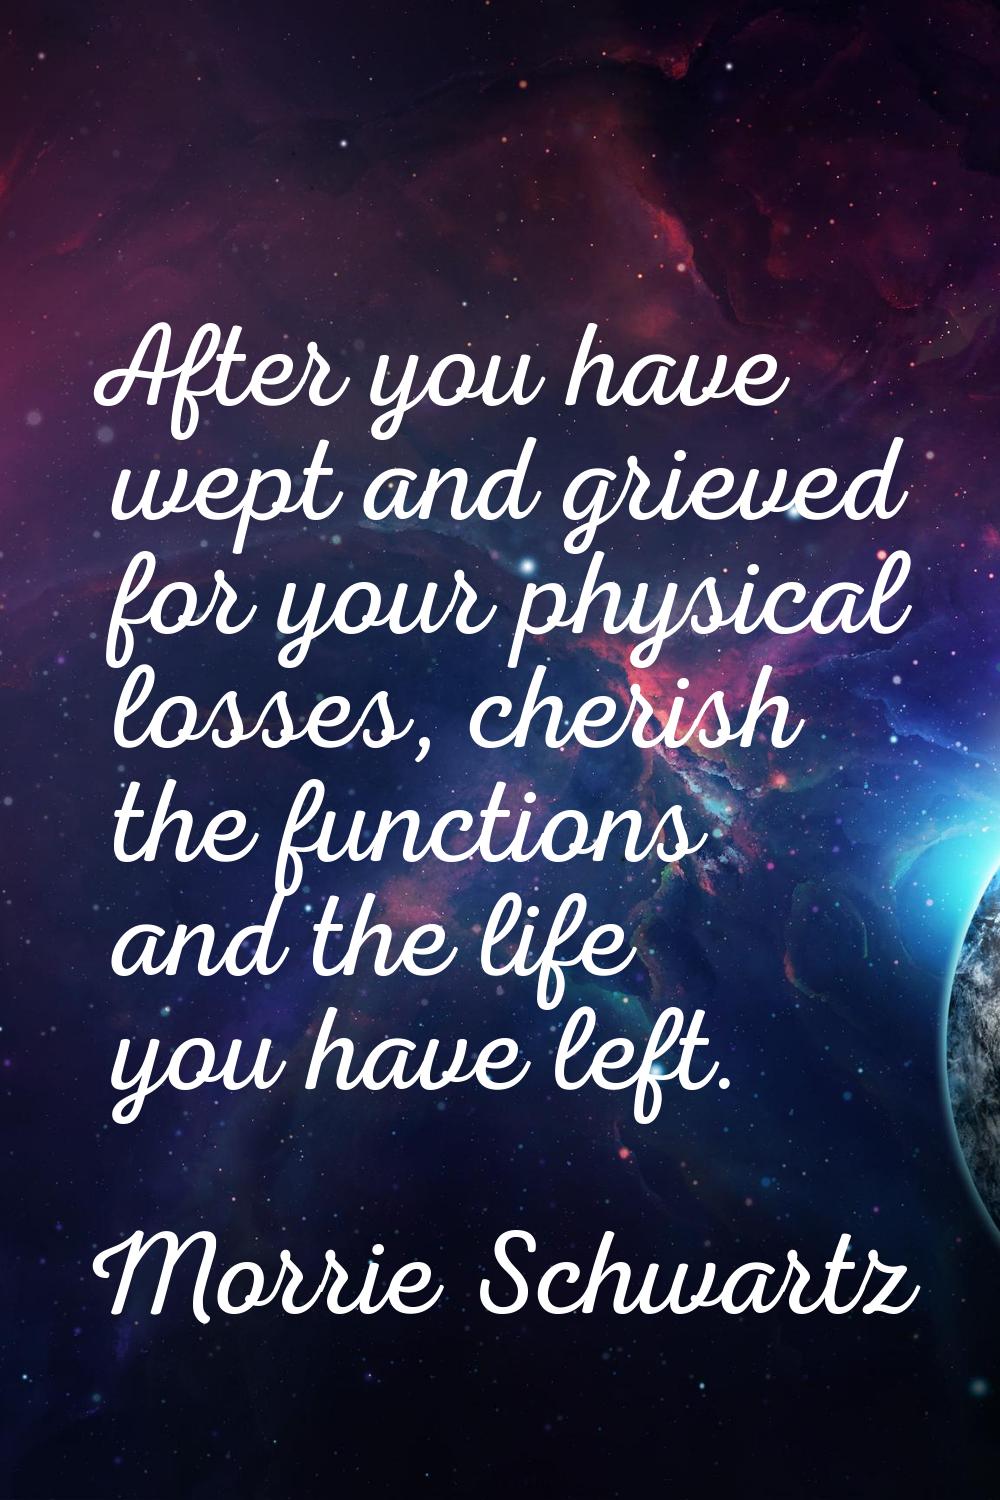 After you have wept and grieved for your physical losses, cherish the functions and the life you ha